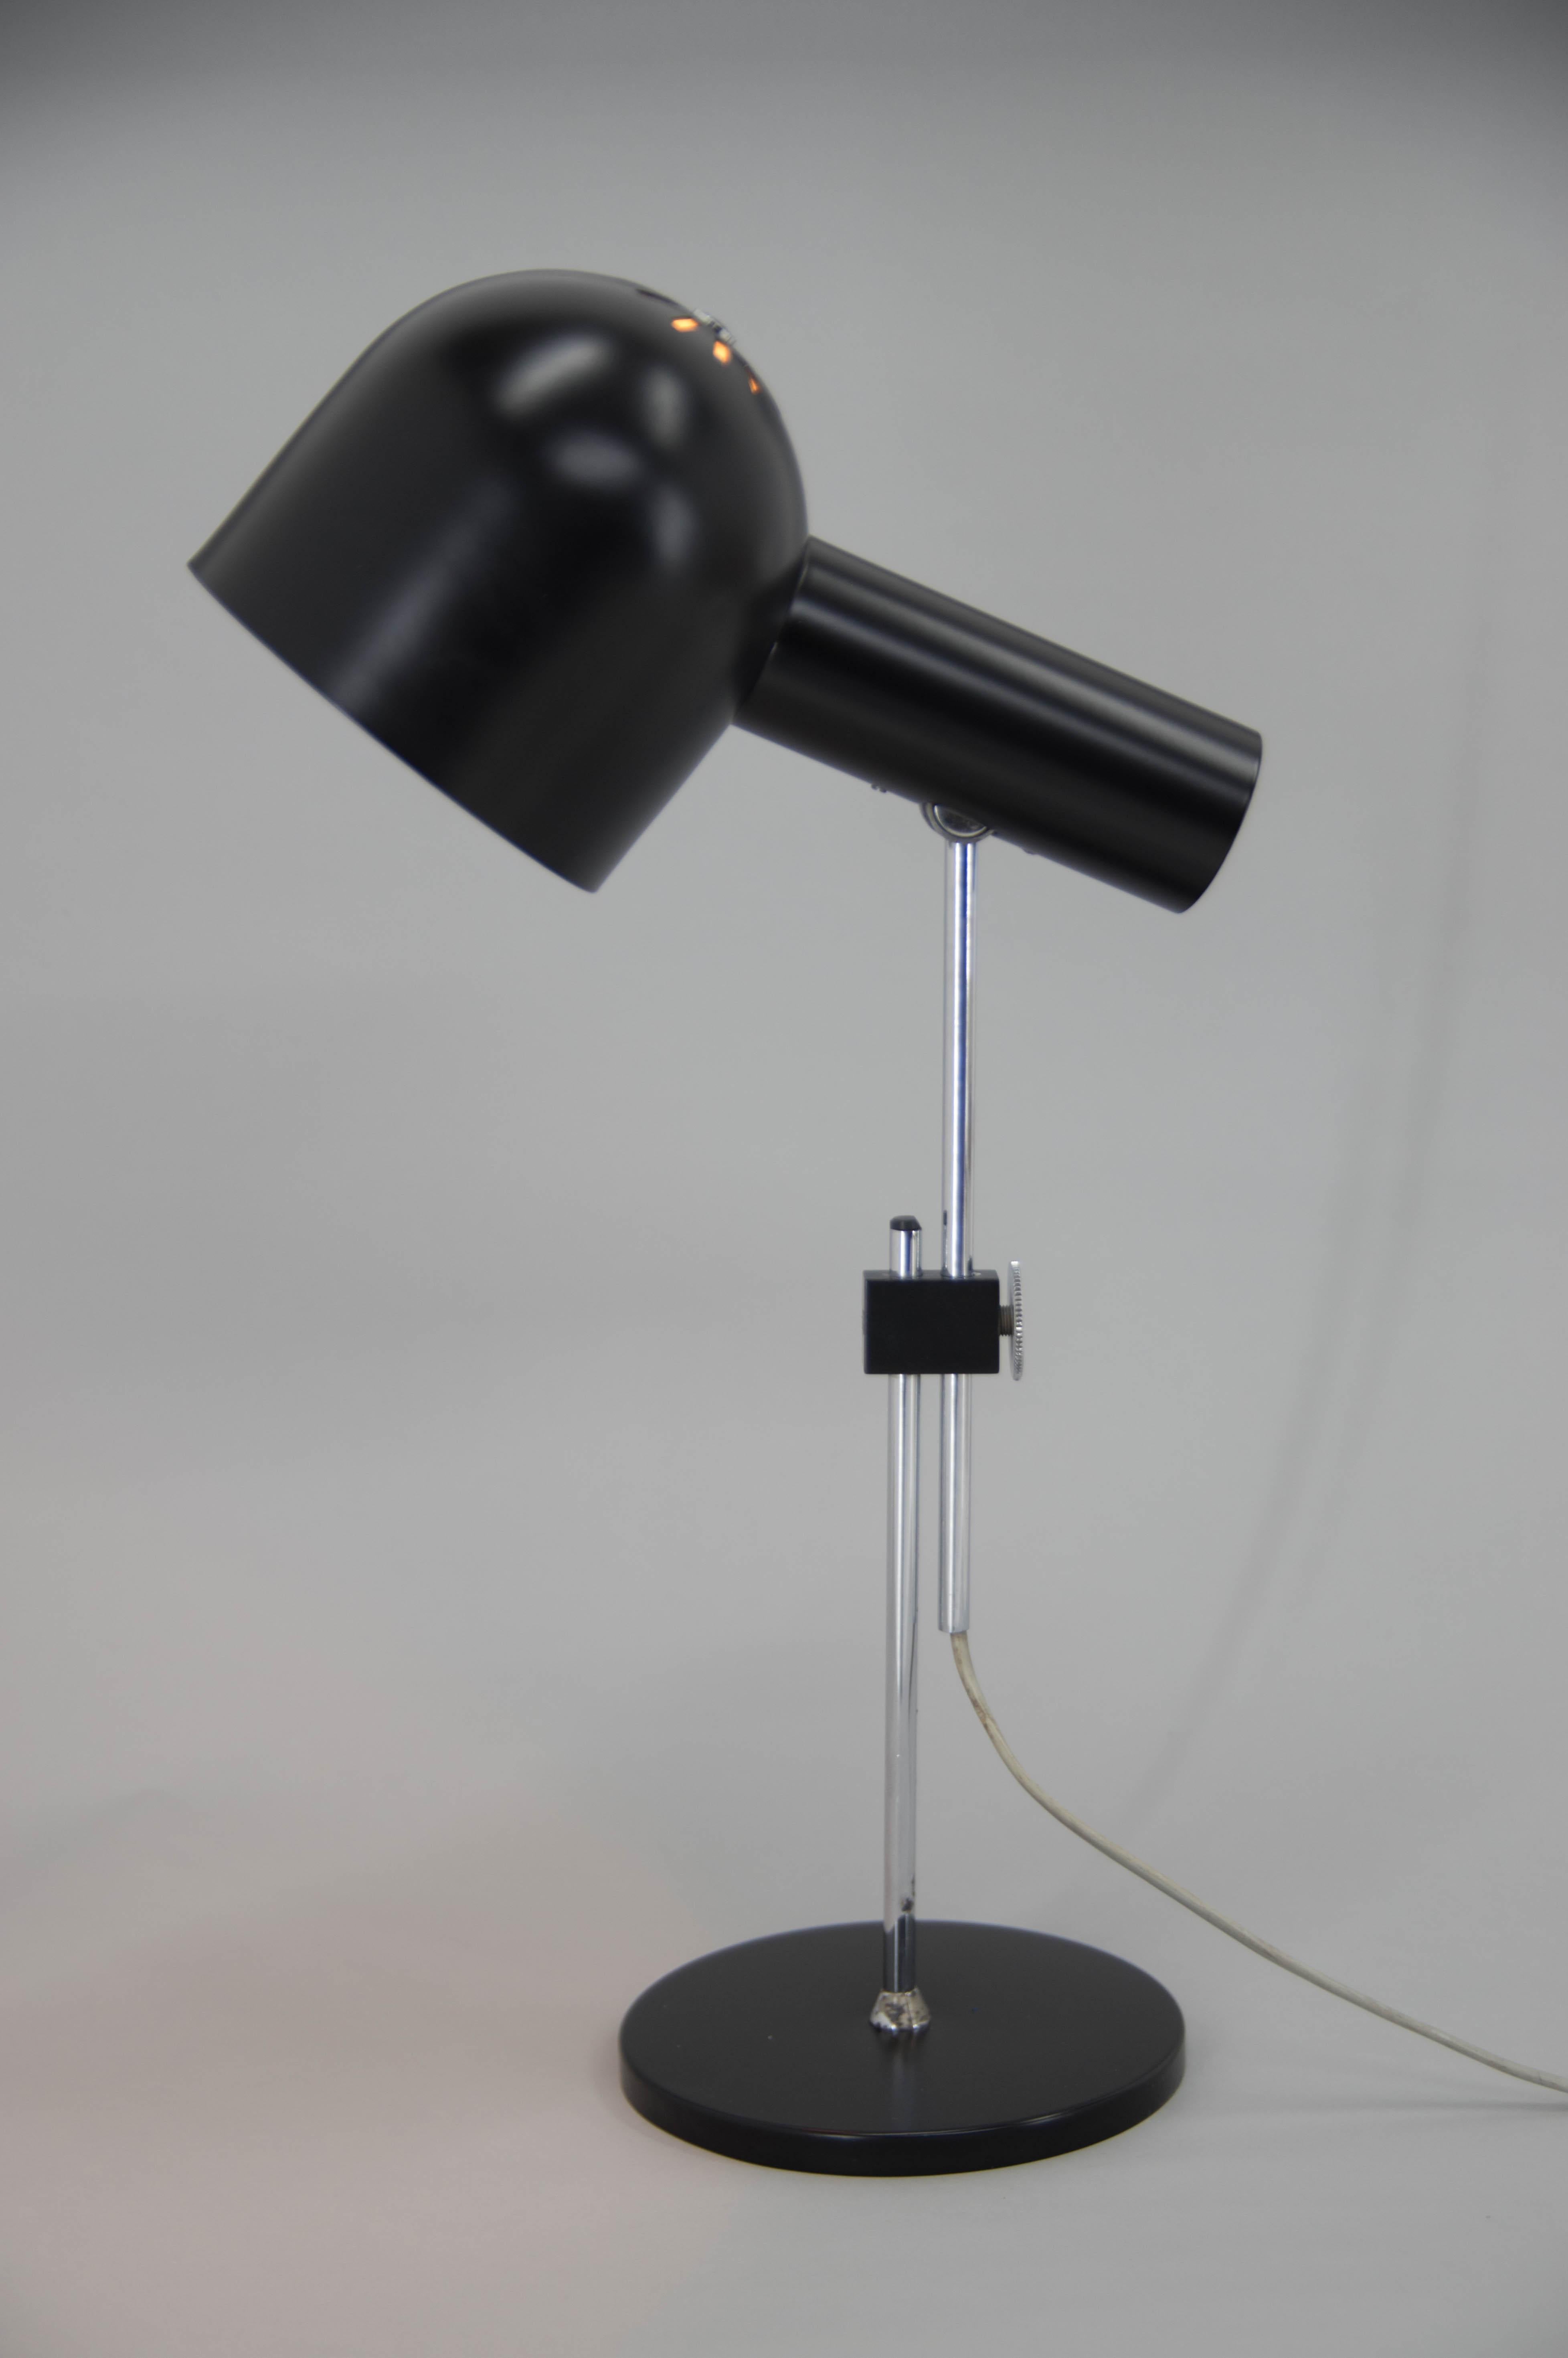 Adjustable height: 40cm-59cm
Flexible shade.
Restored: new black paint
 1x75W, E25-E27 bulb
US plug adapter included
Shipping quote on request.